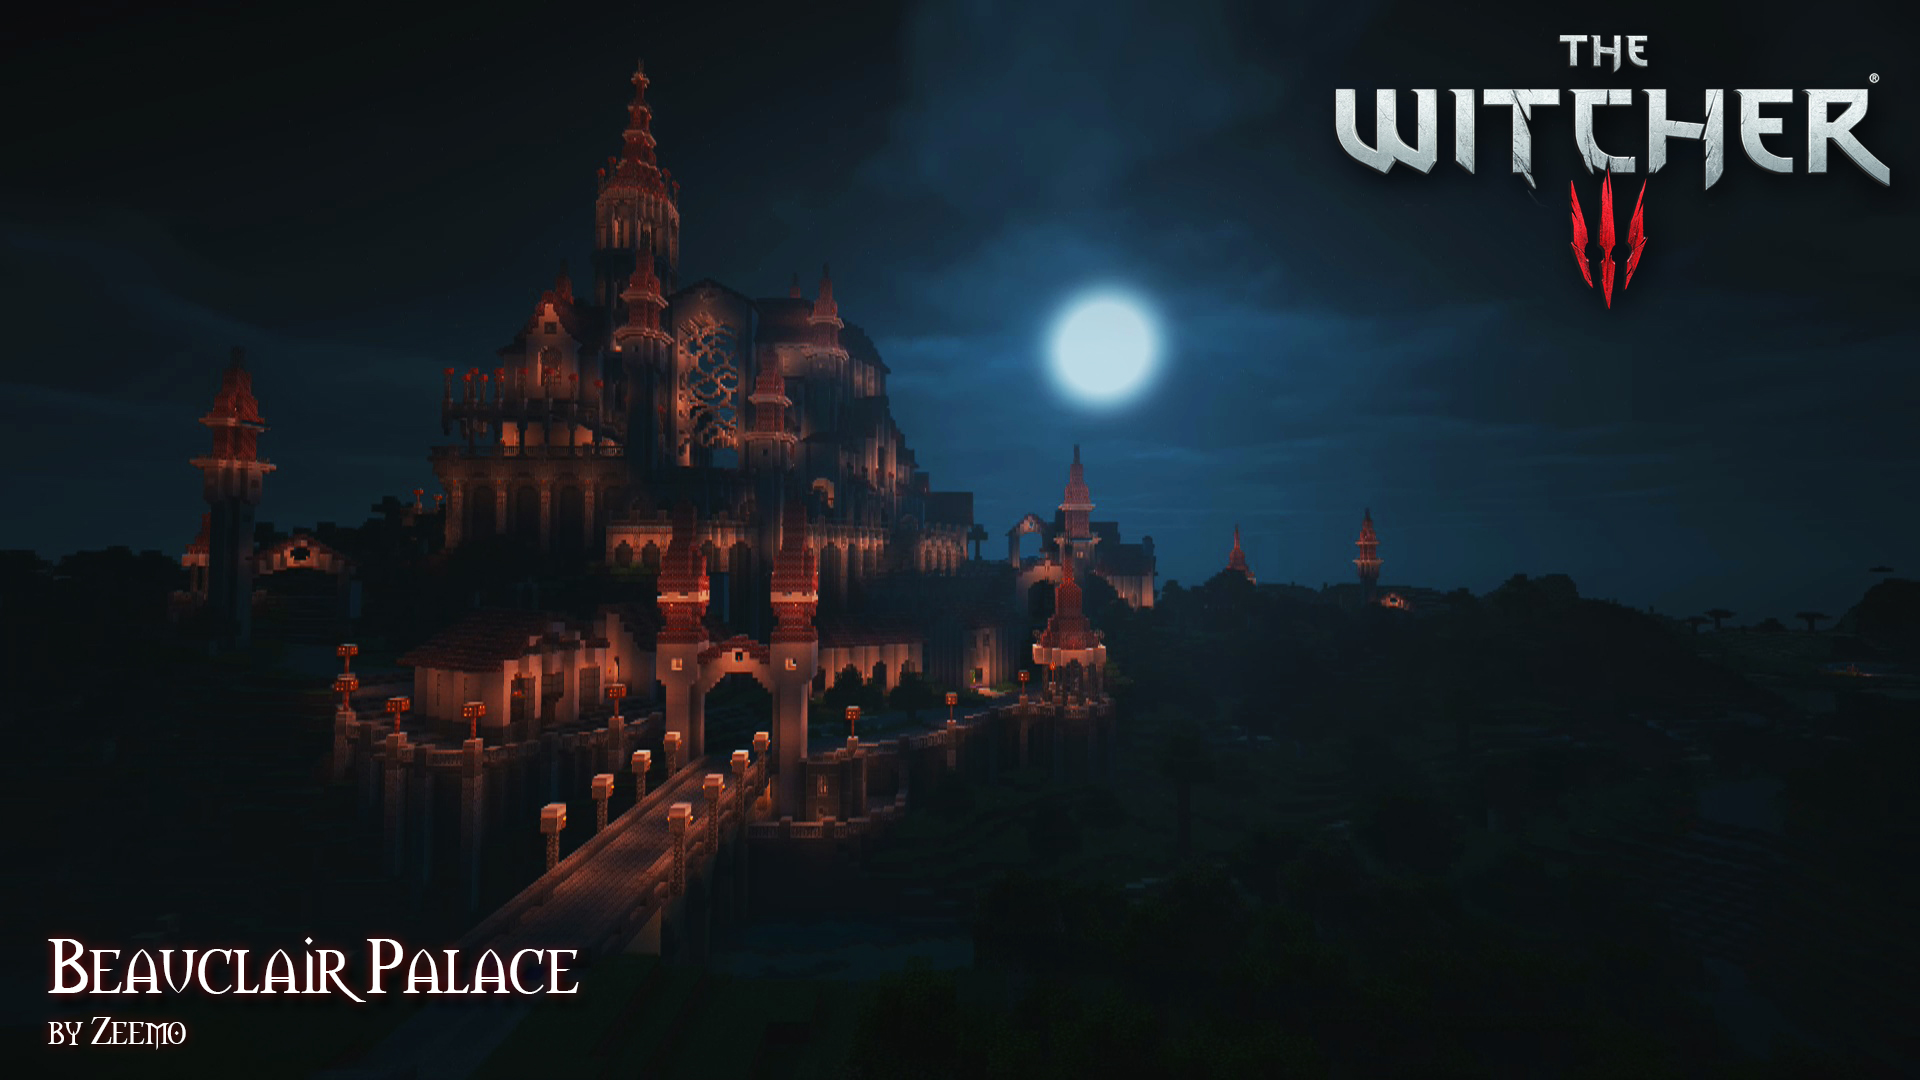 The Witcher - Beauclair Palace screenshot 3